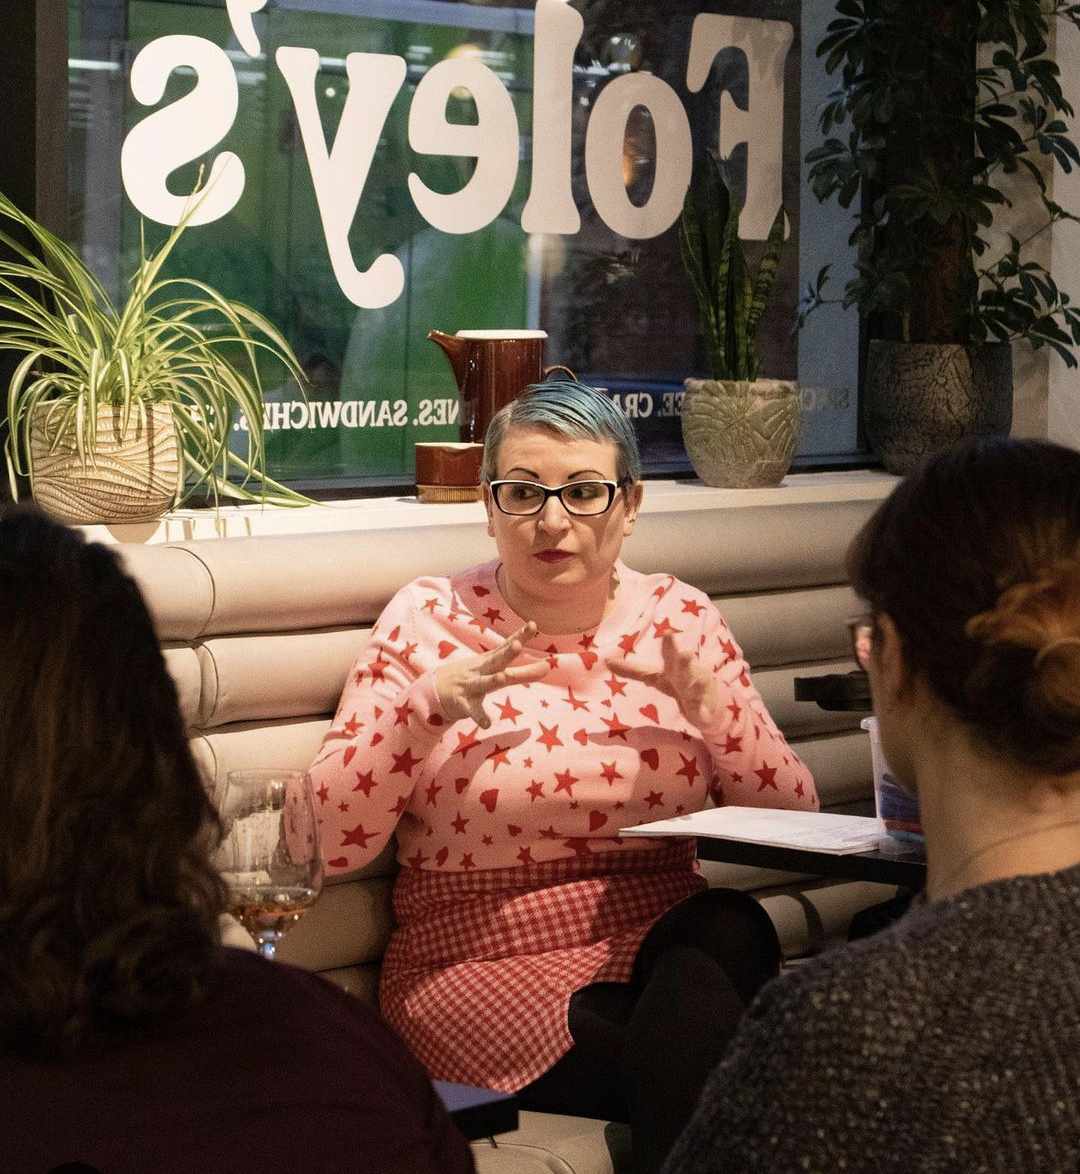 Gemma, a white woman with glasses and short blue hair, sits at a table with a few other people. She is wearing a pink jumper with red stars on it, and a pink and red check skirt.